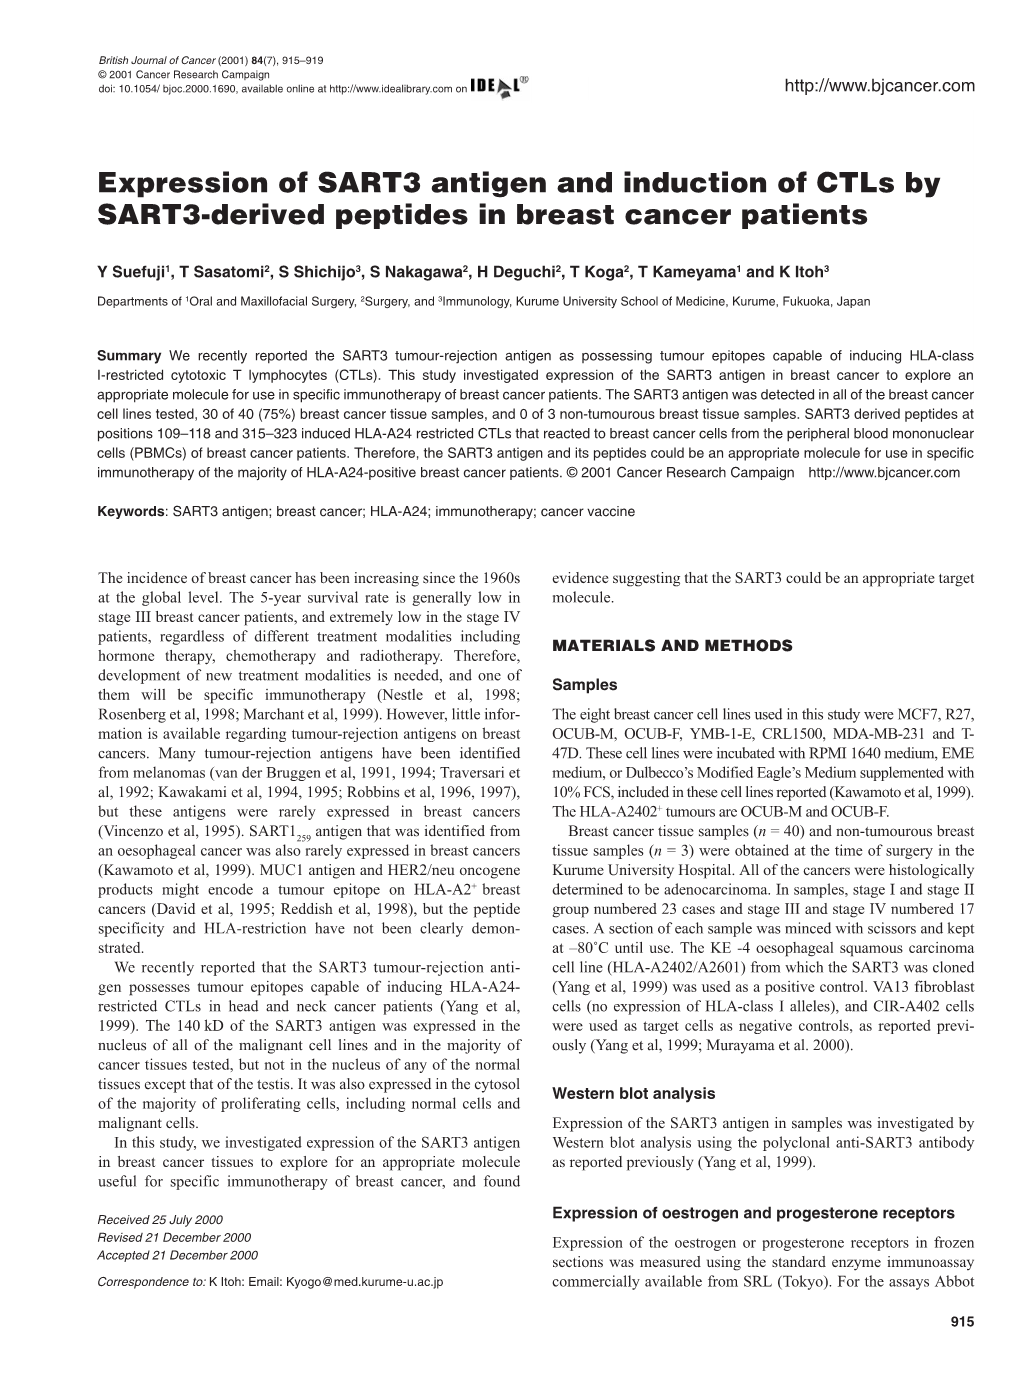 Expression of SART3 Antigen and Induction of Ctls by SART3-Derived Peptides in Breast Cancer Patients